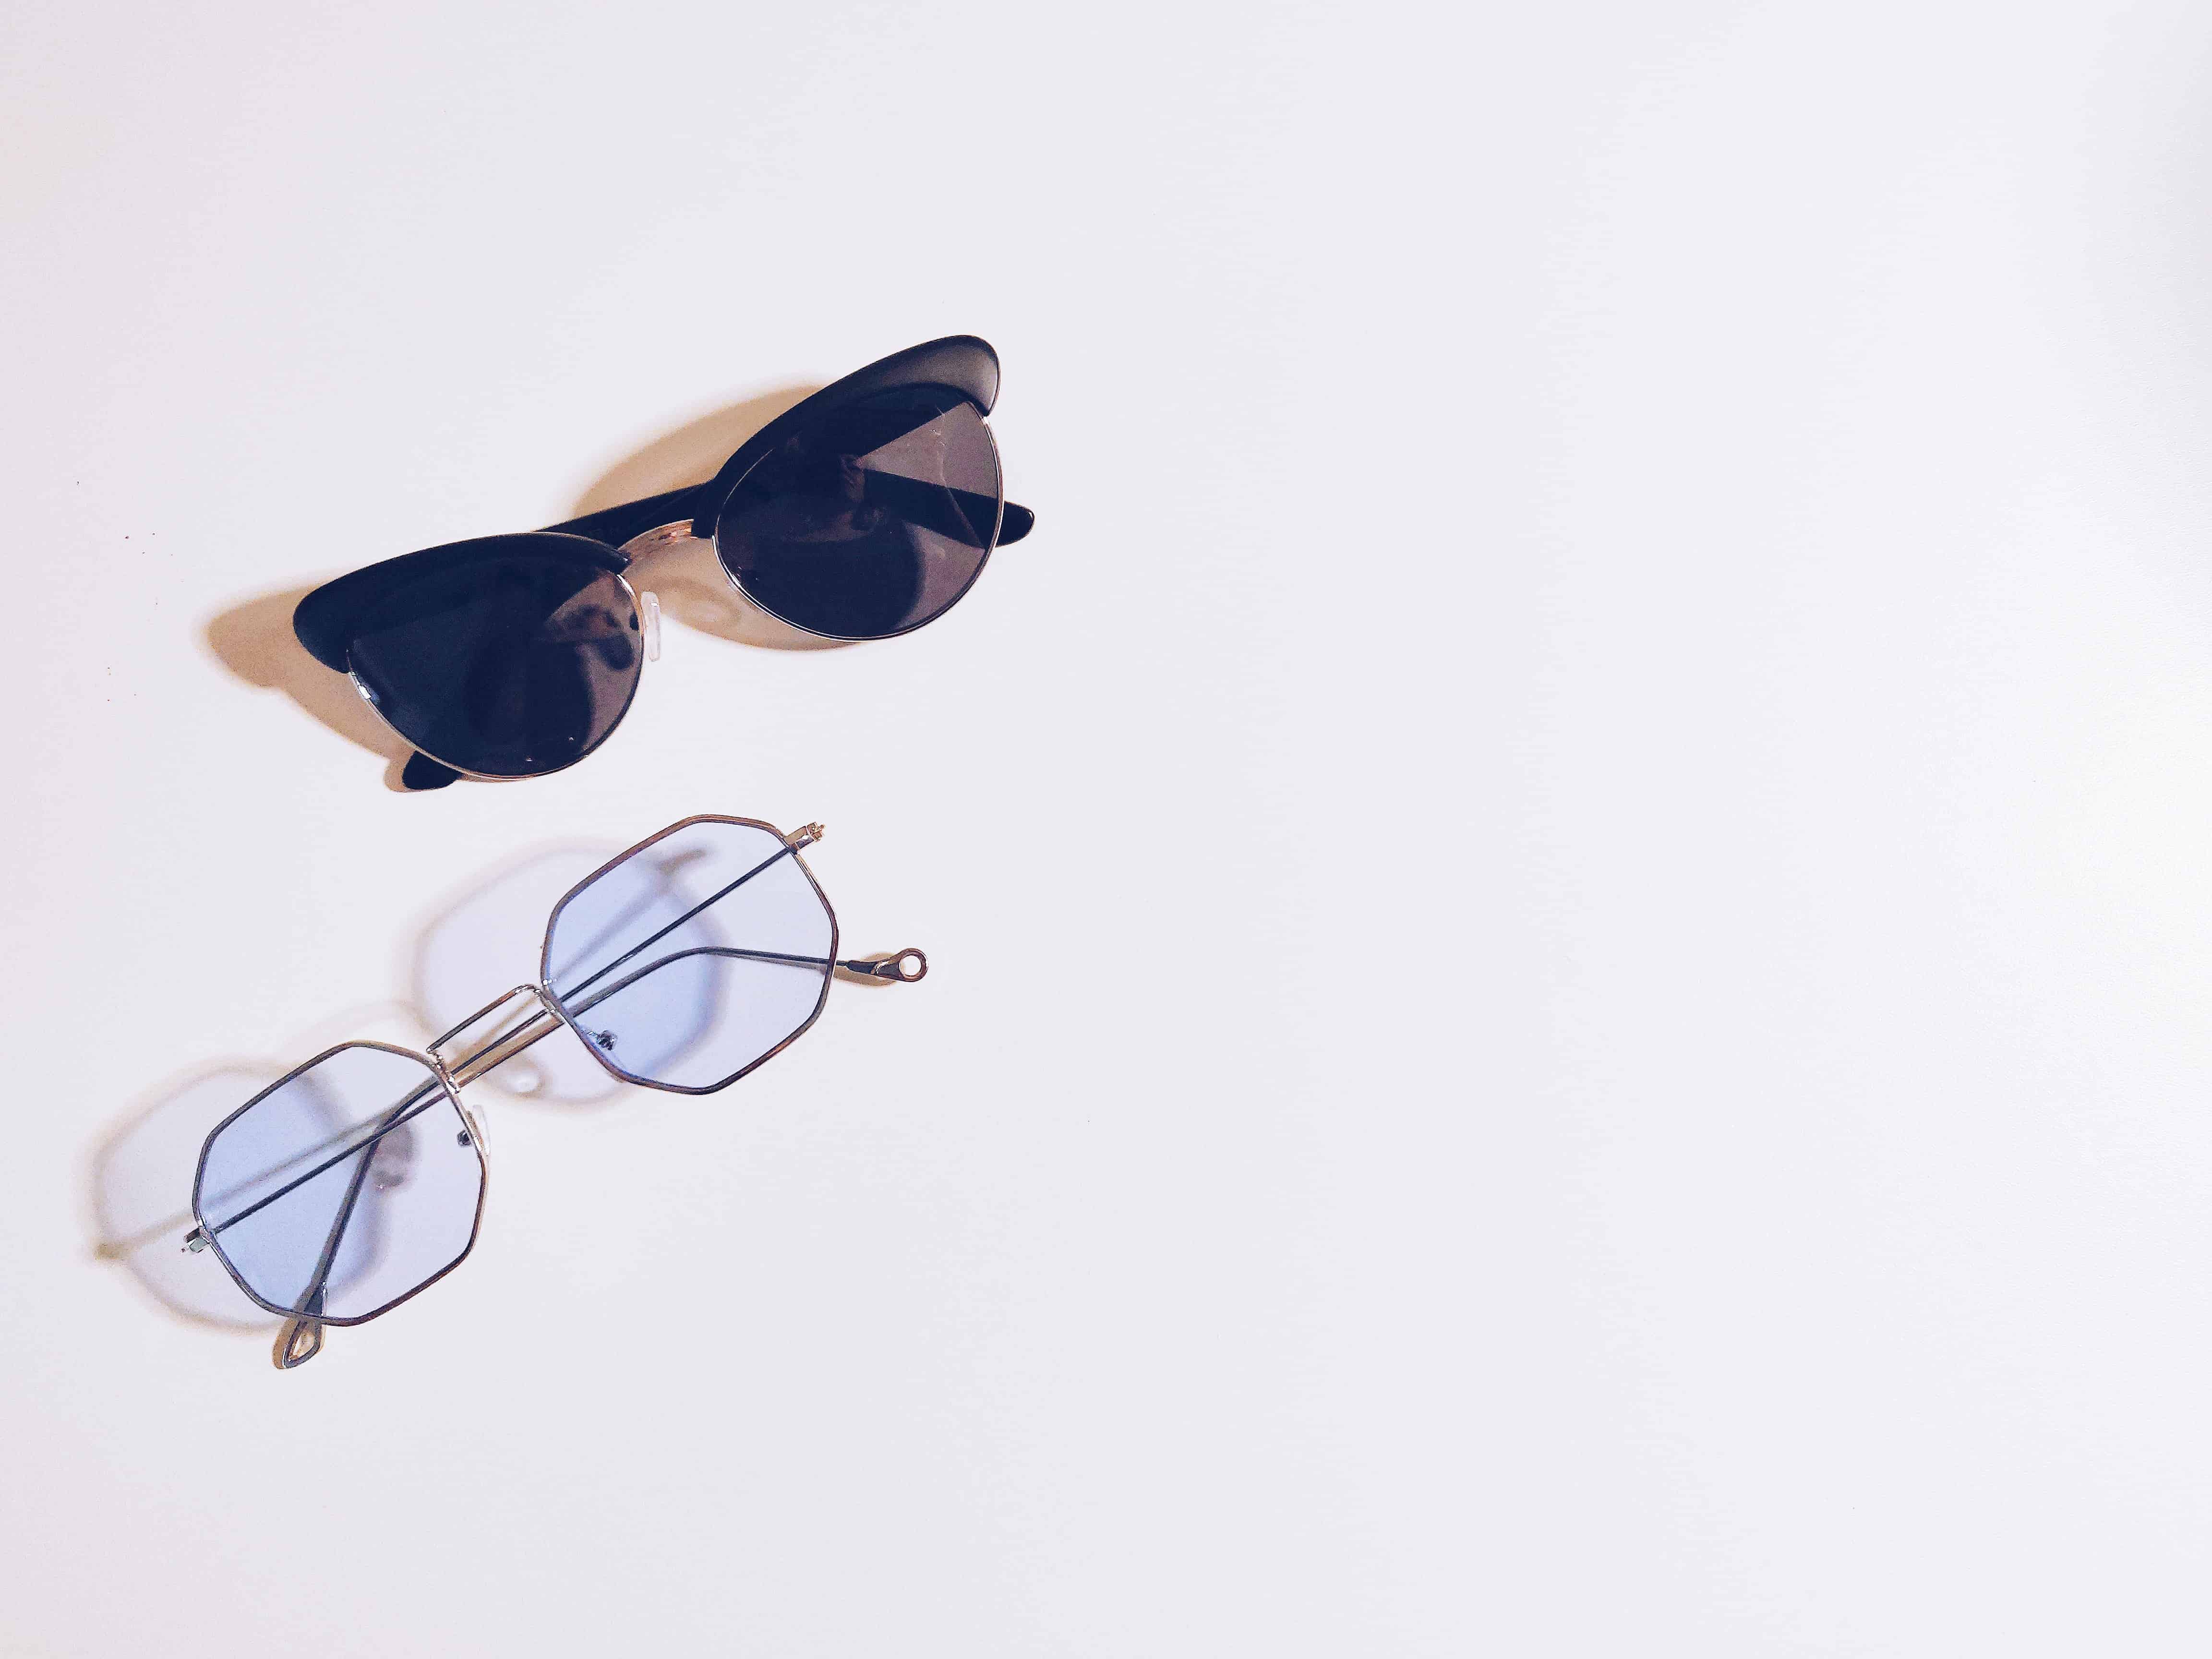 The Best Kris Kringle Gift Ideas for Every Budget: Sunglasses